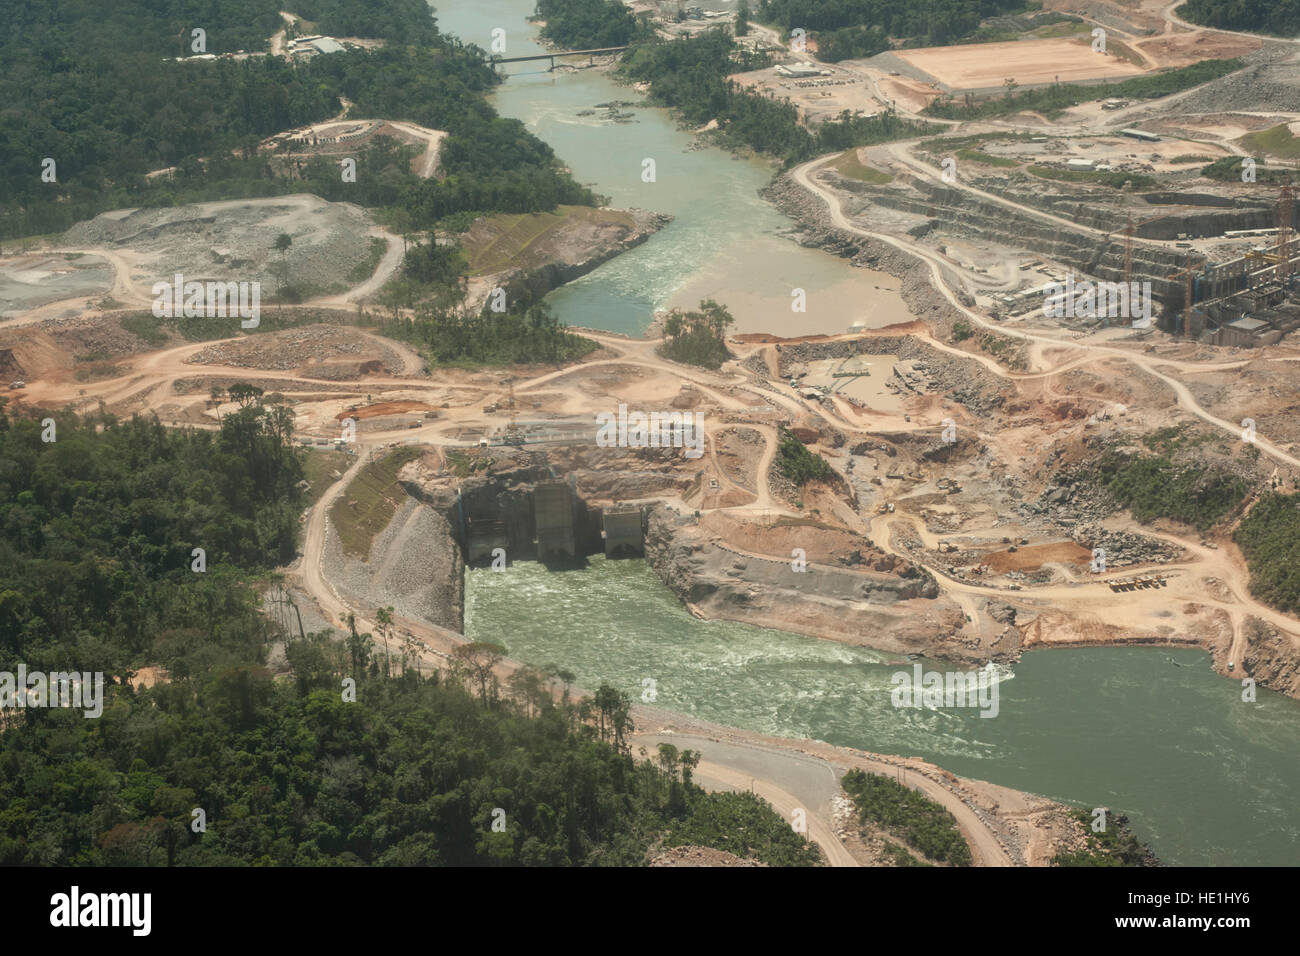 Aerial view of the construction site of a Hydroelectric power plant in the Brazilian Amazon Rain Forest, close to the city of Alta Floresta. Stock Photo